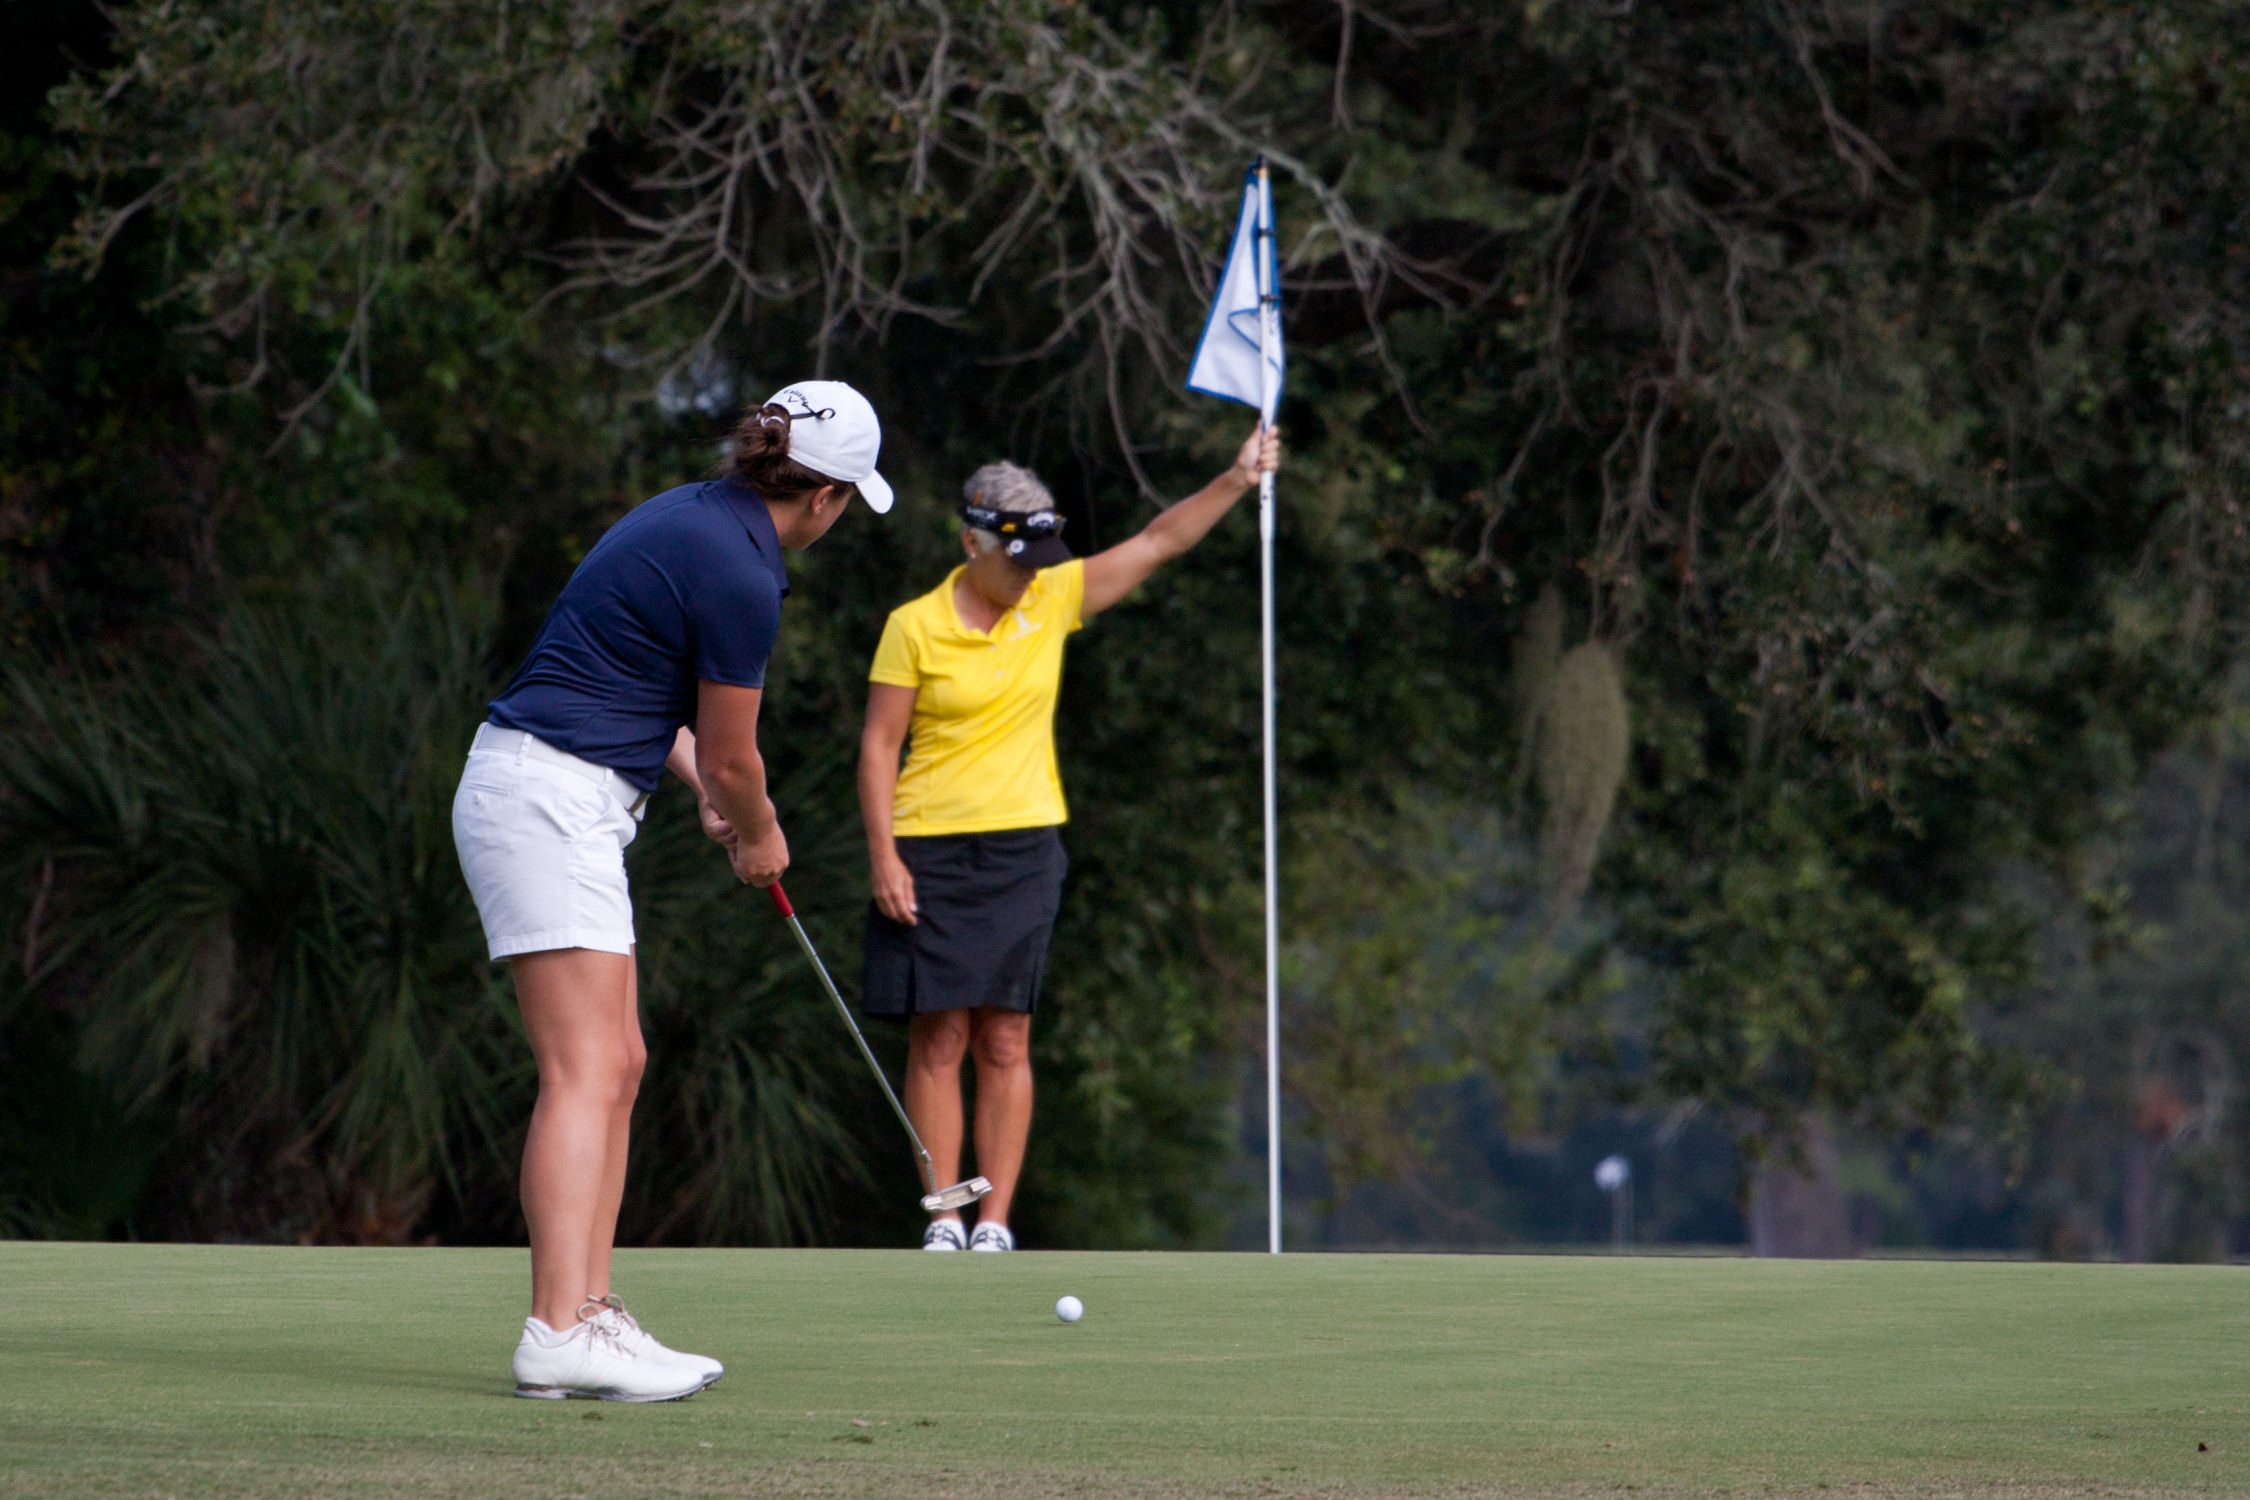 7 Ways to Enhance Your Golf Experience as a Lady Player